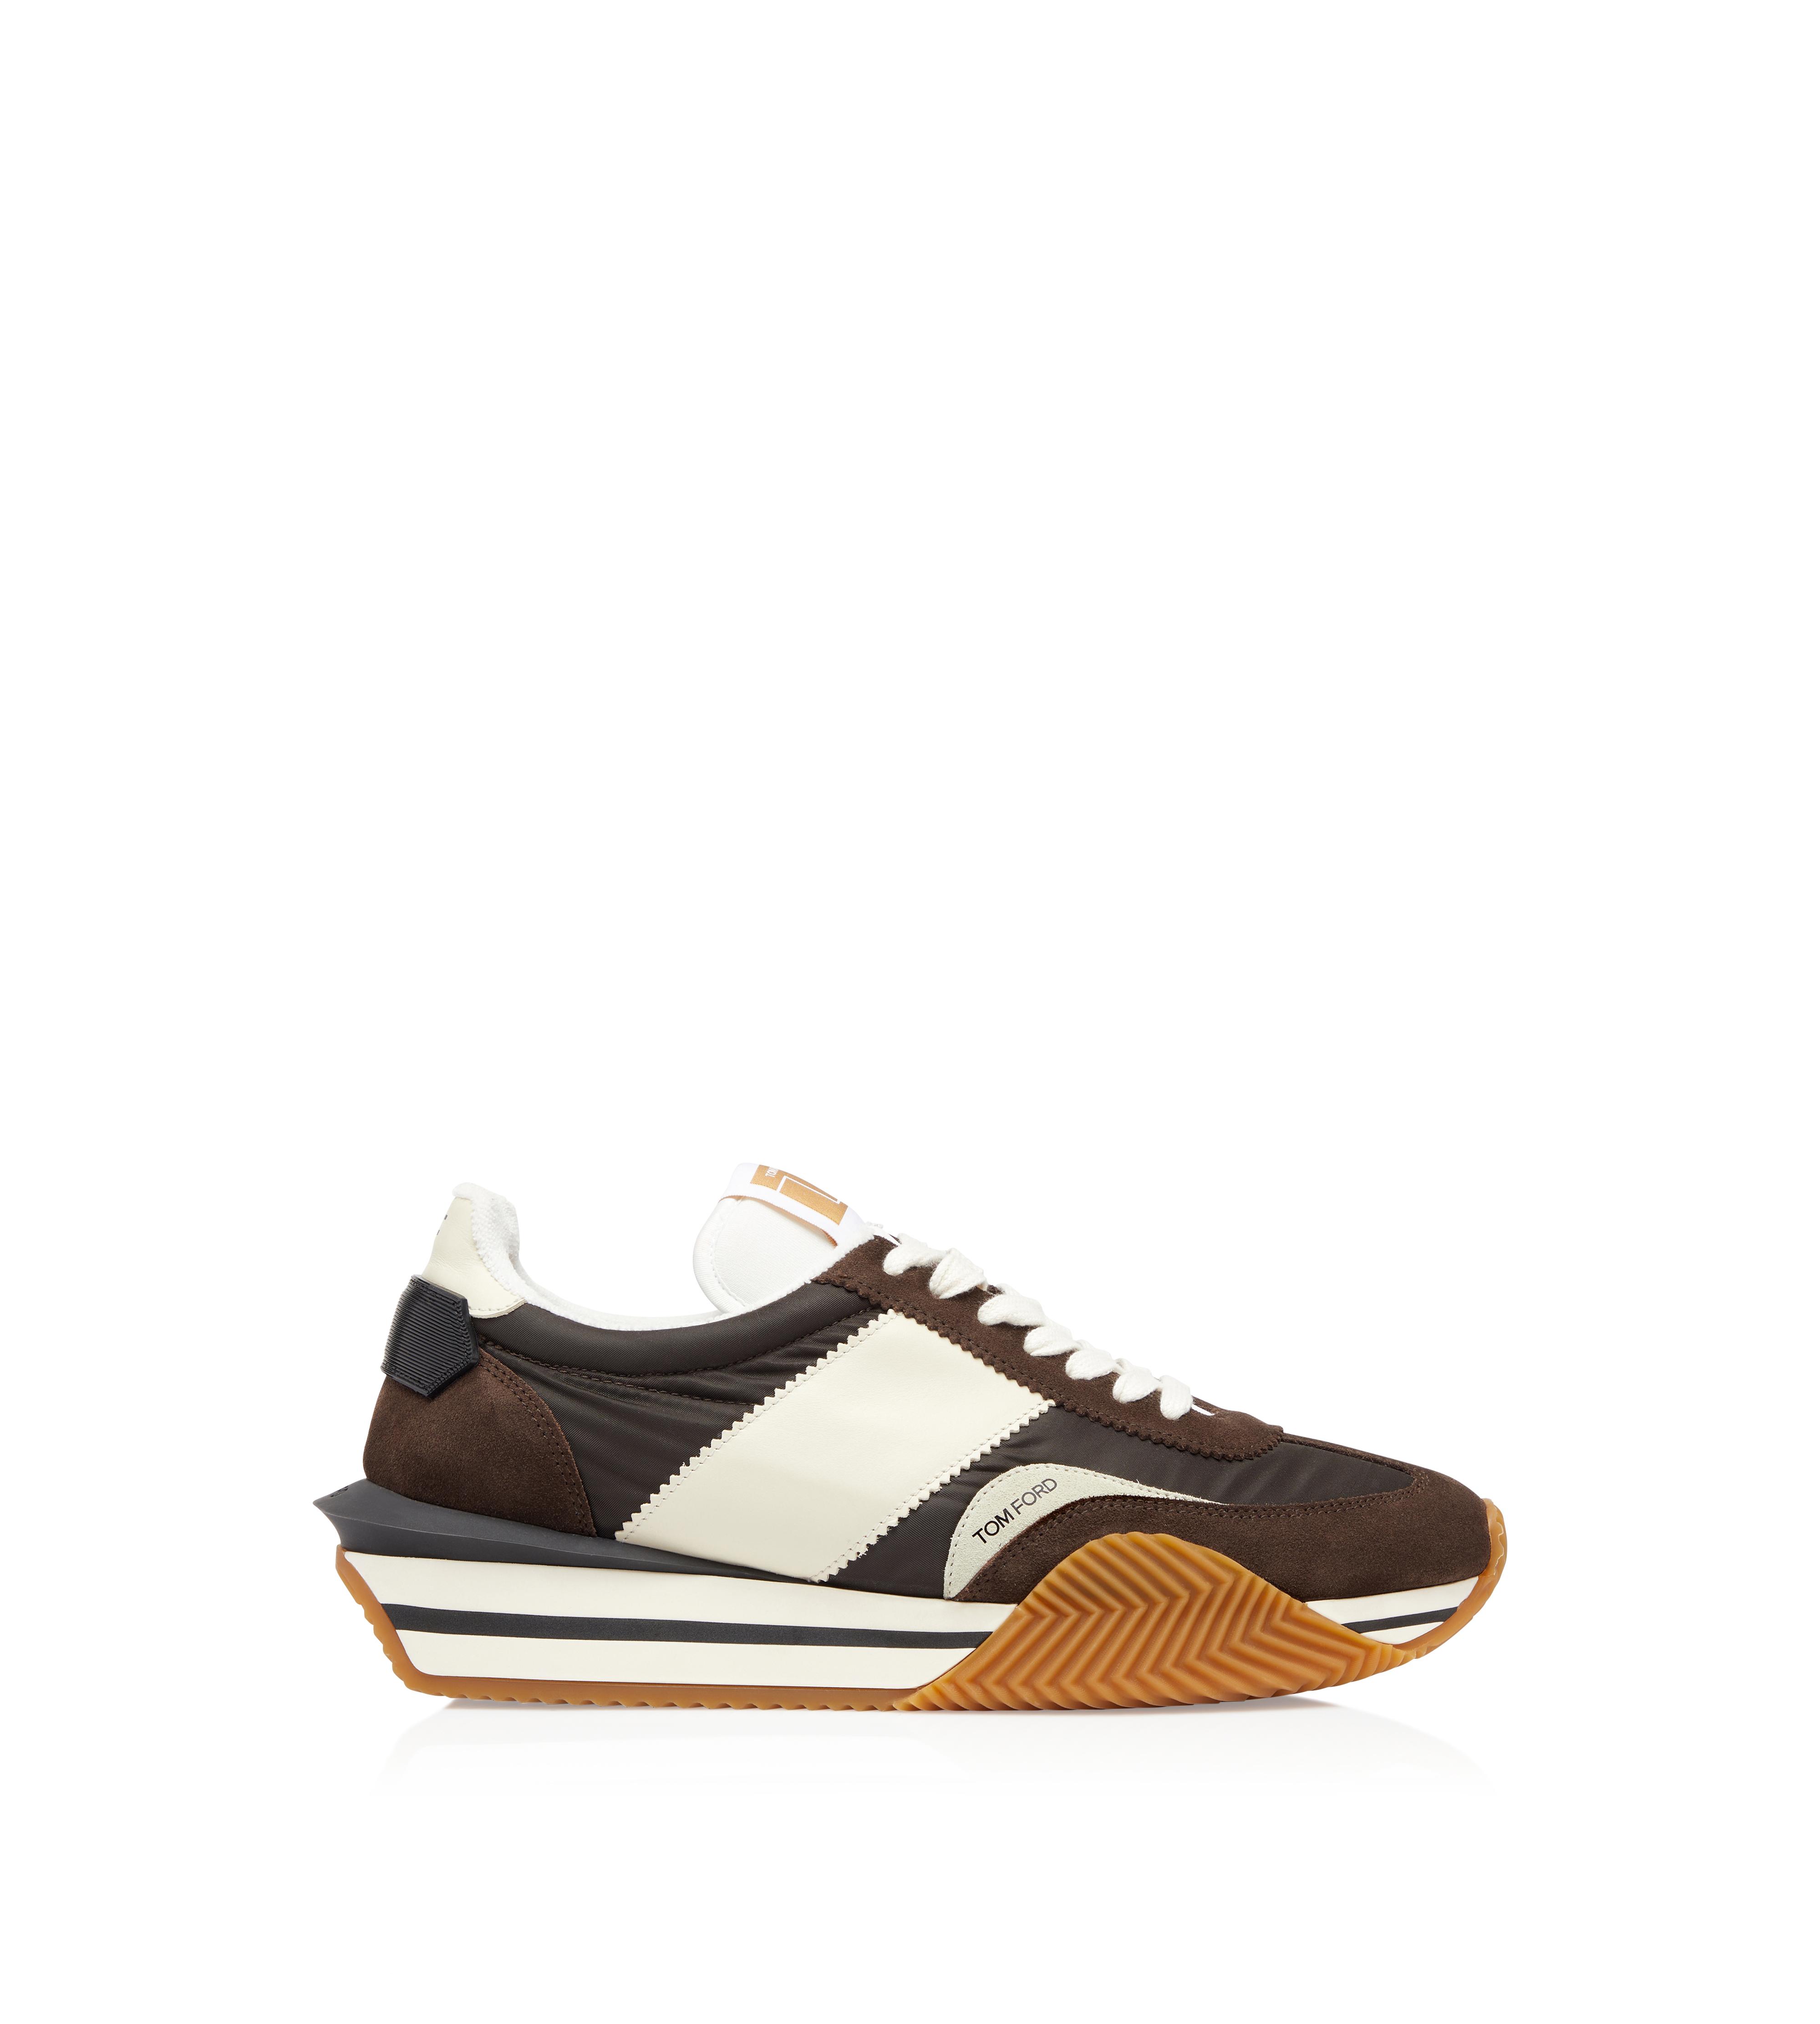 Arriba 34+ imagen tom ford athletic shoes